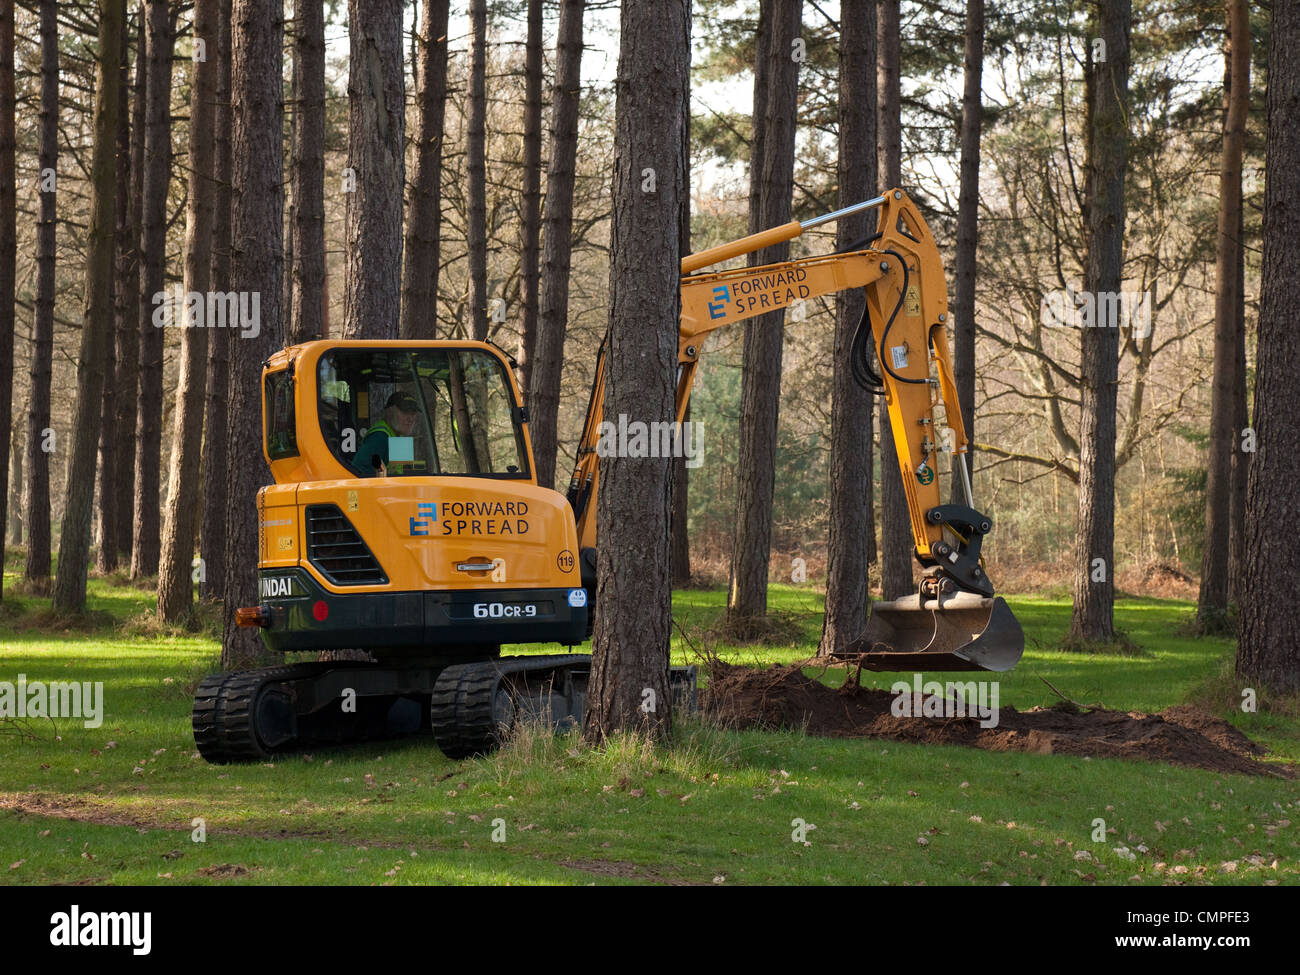 Machinery used for land management and forestry by Forestry Commission, Thetford Forest, Norfolk UK Stock Photo